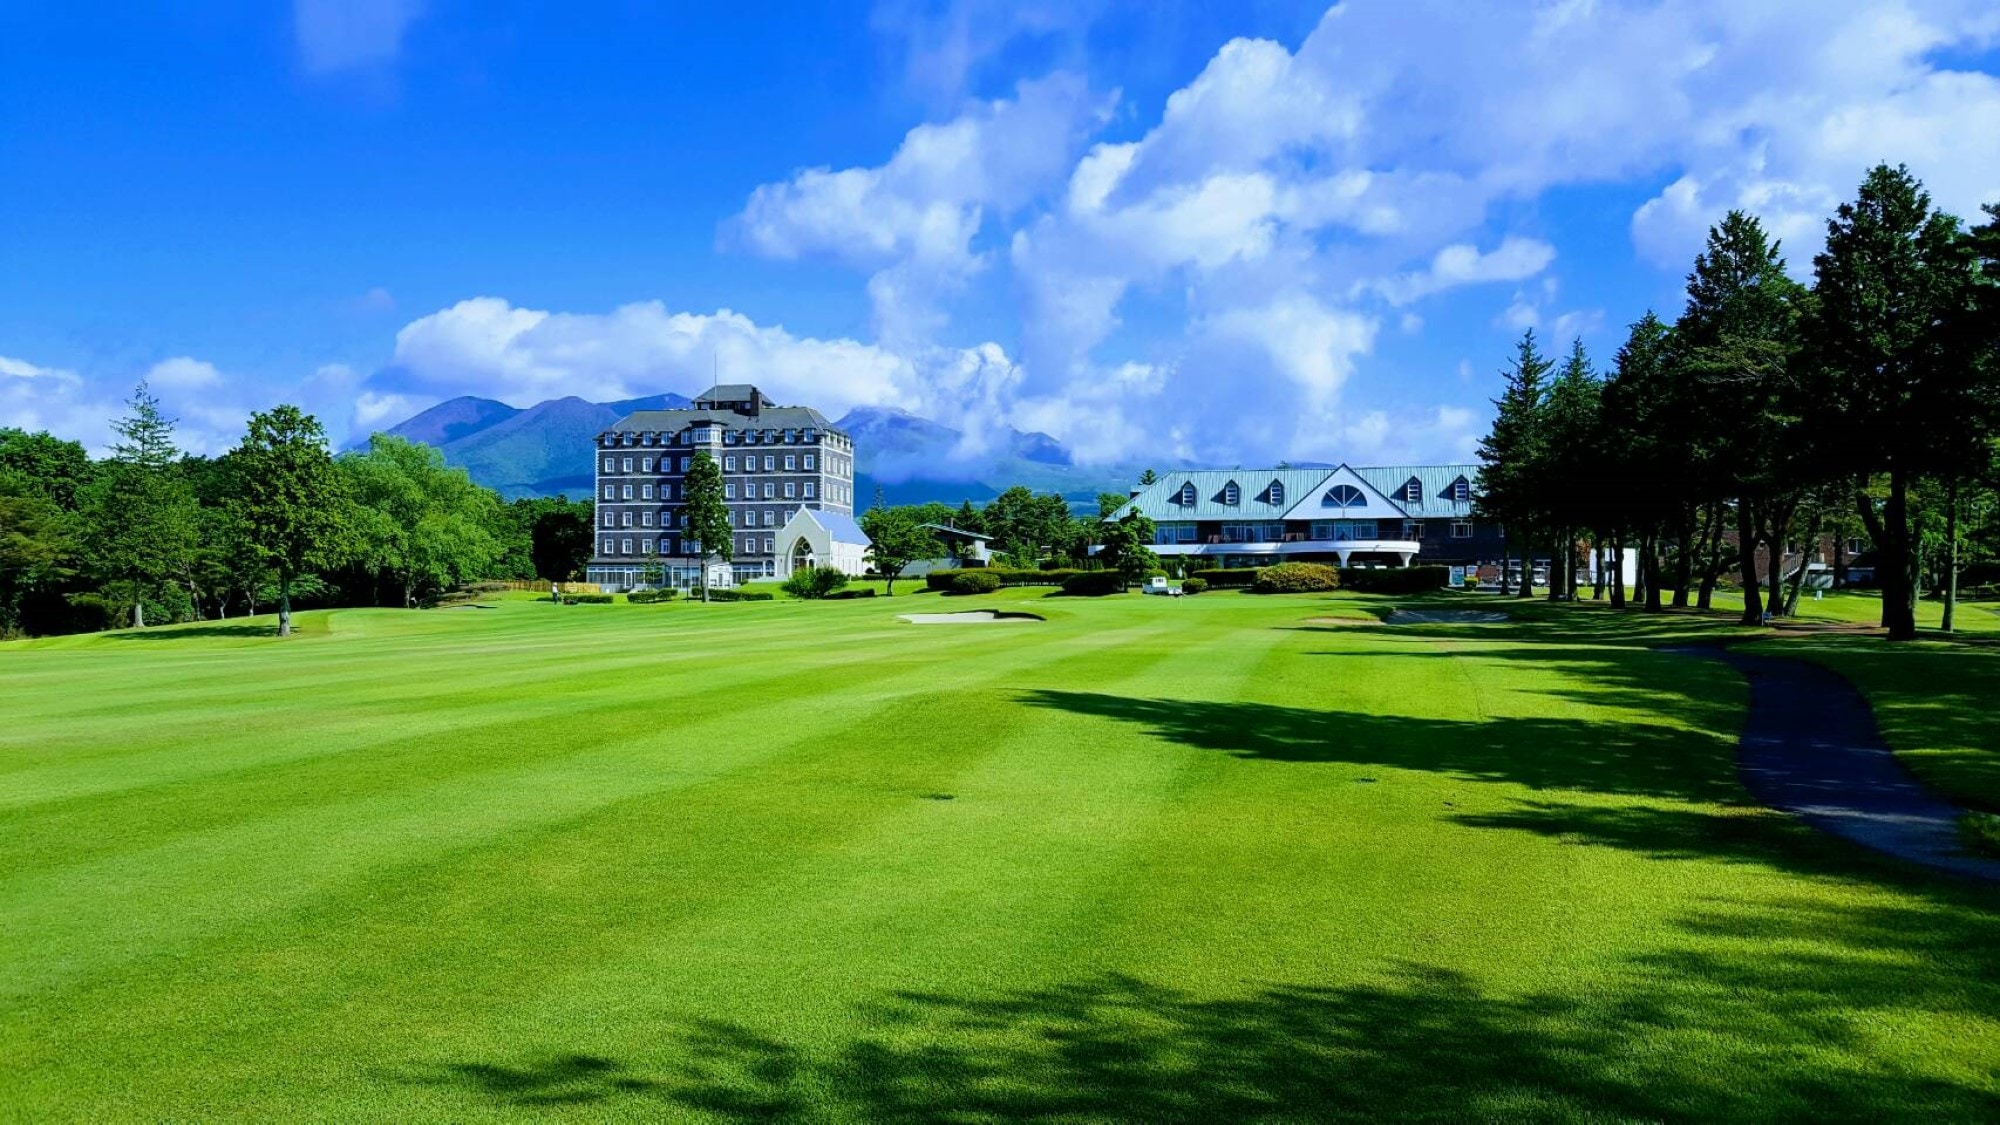 [Exterior] Hotel from the golf course